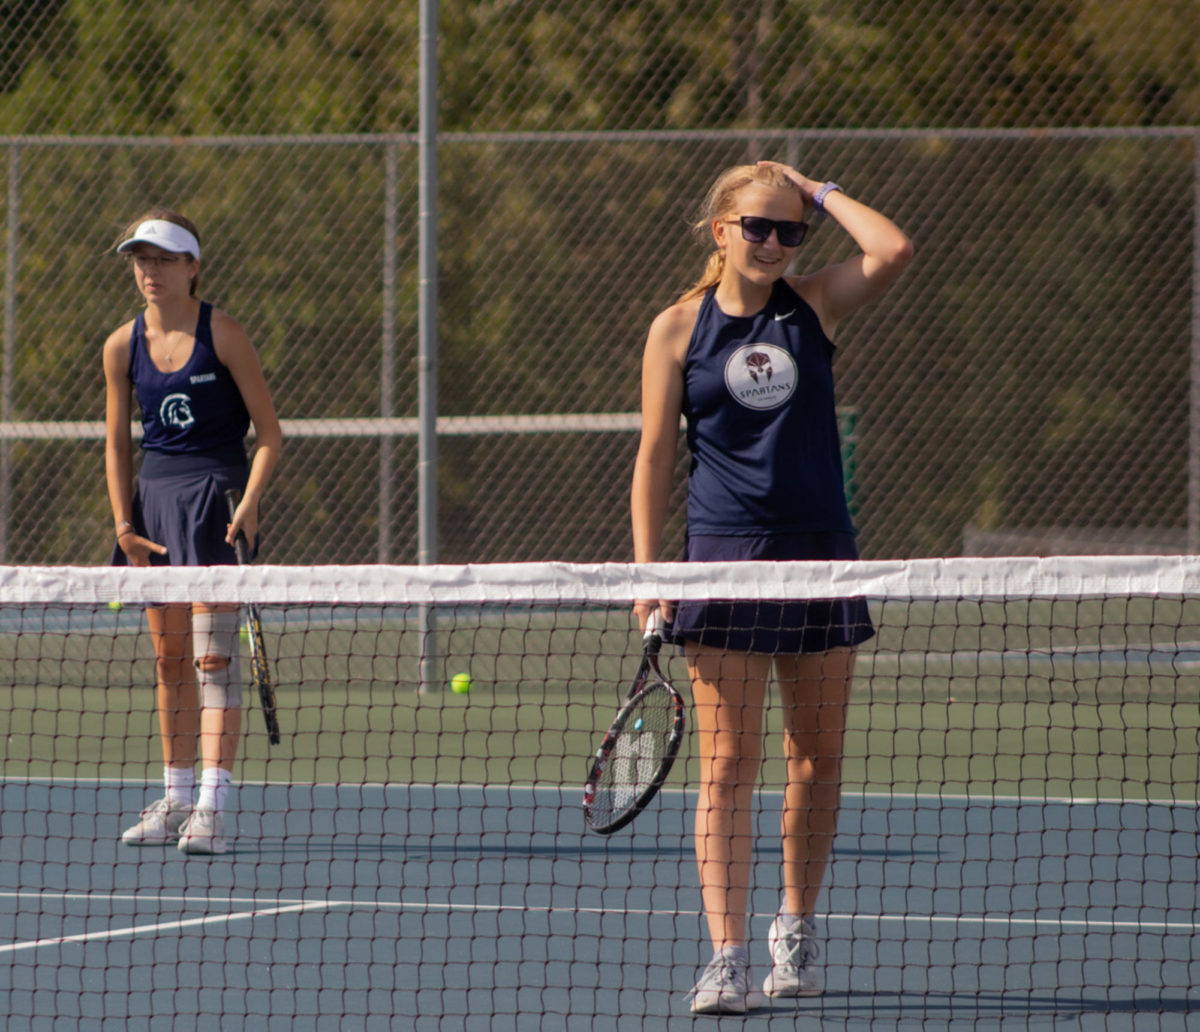 Sophie+Rosser+and+Rachel+Latzel+shake+off+a+bad+point+in+their+match+against+Timberland+High+School.+The+duo+pushed+through+and+won+their+match+6-4+on+Sept.+12.